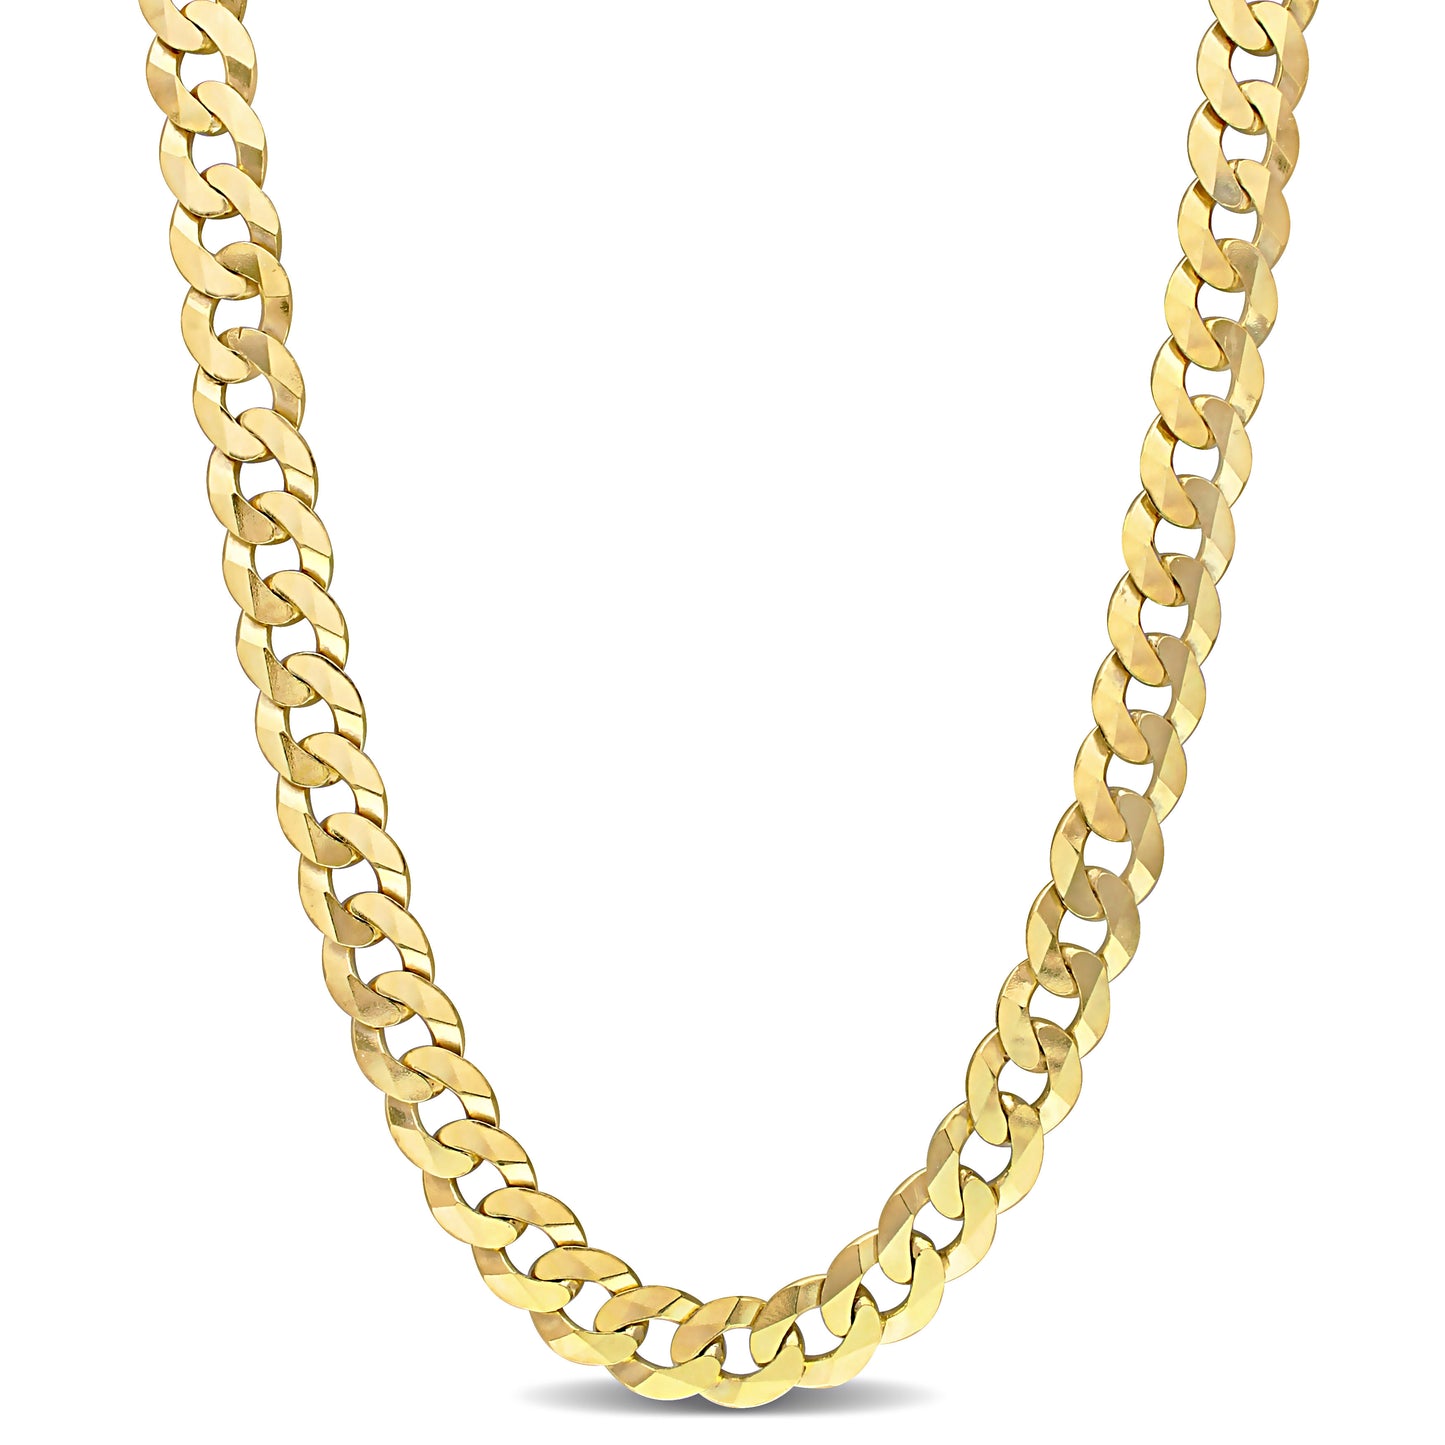 18k Yellow Gold Plated Curb Chain in 10.5mm